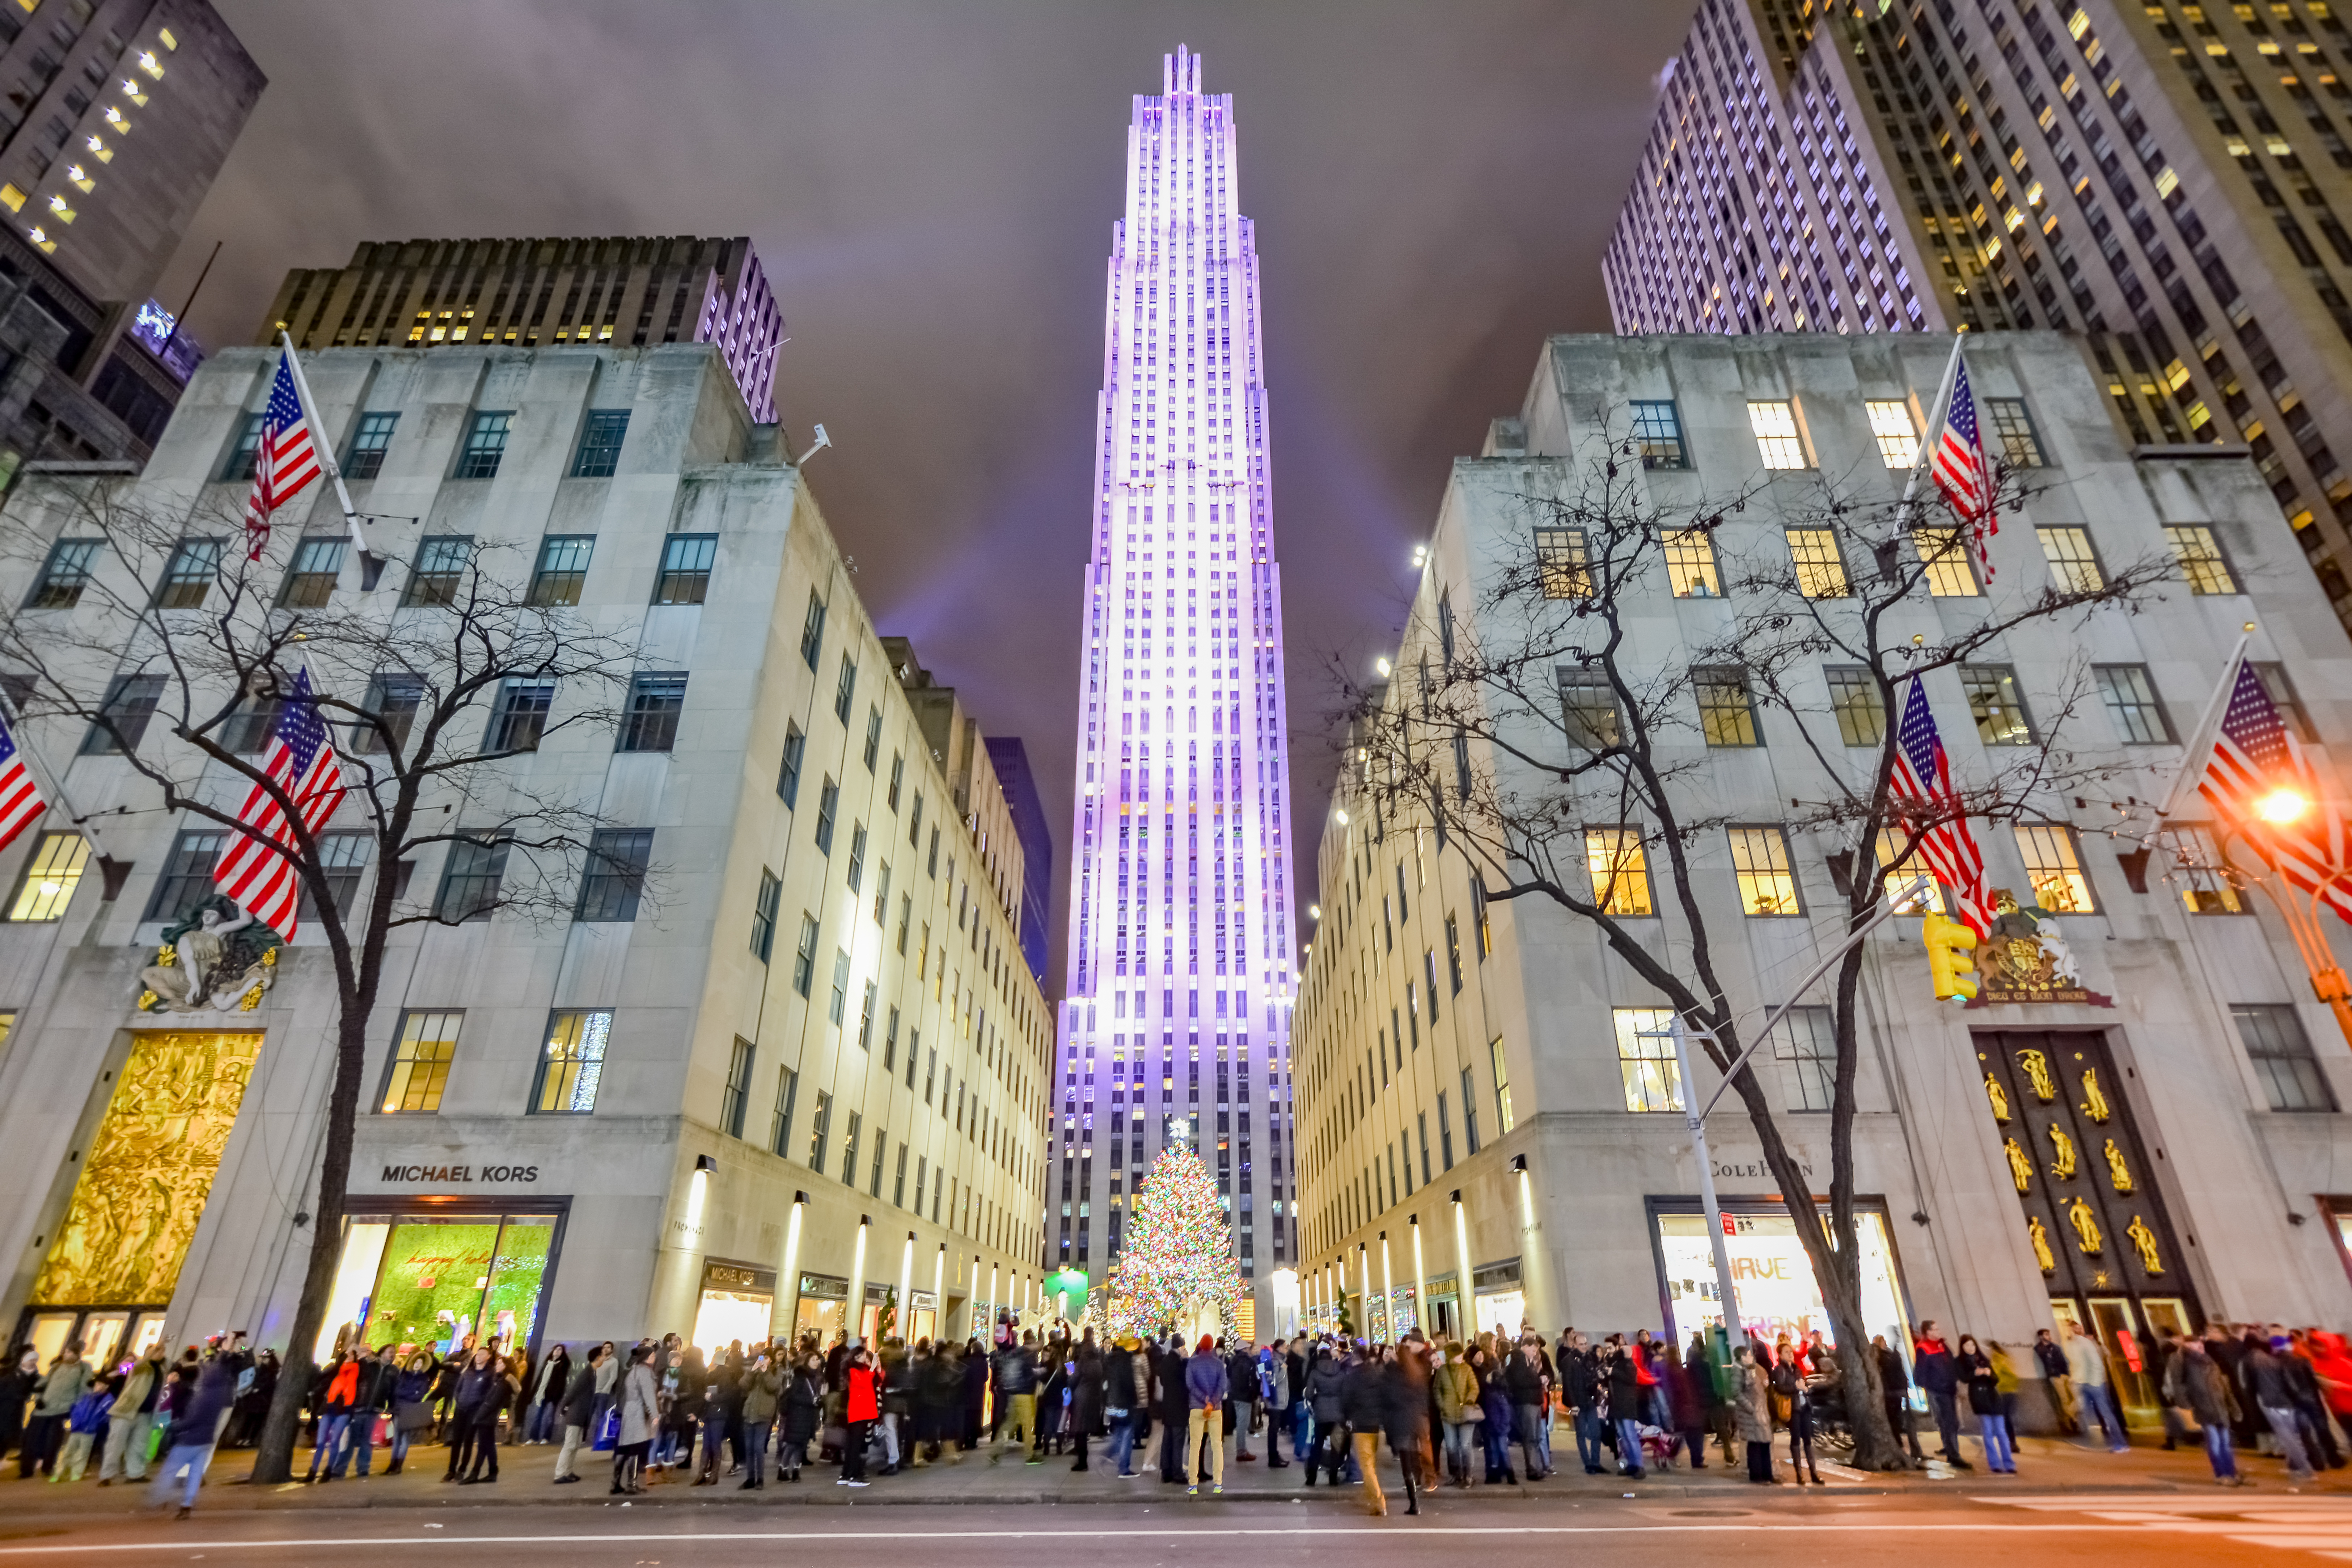 Discover the financial capital and cultural centre of the world! This route will guide you to many of New York's most iconic spots, including Times Square, the Museum of Modern Art and Central Park.